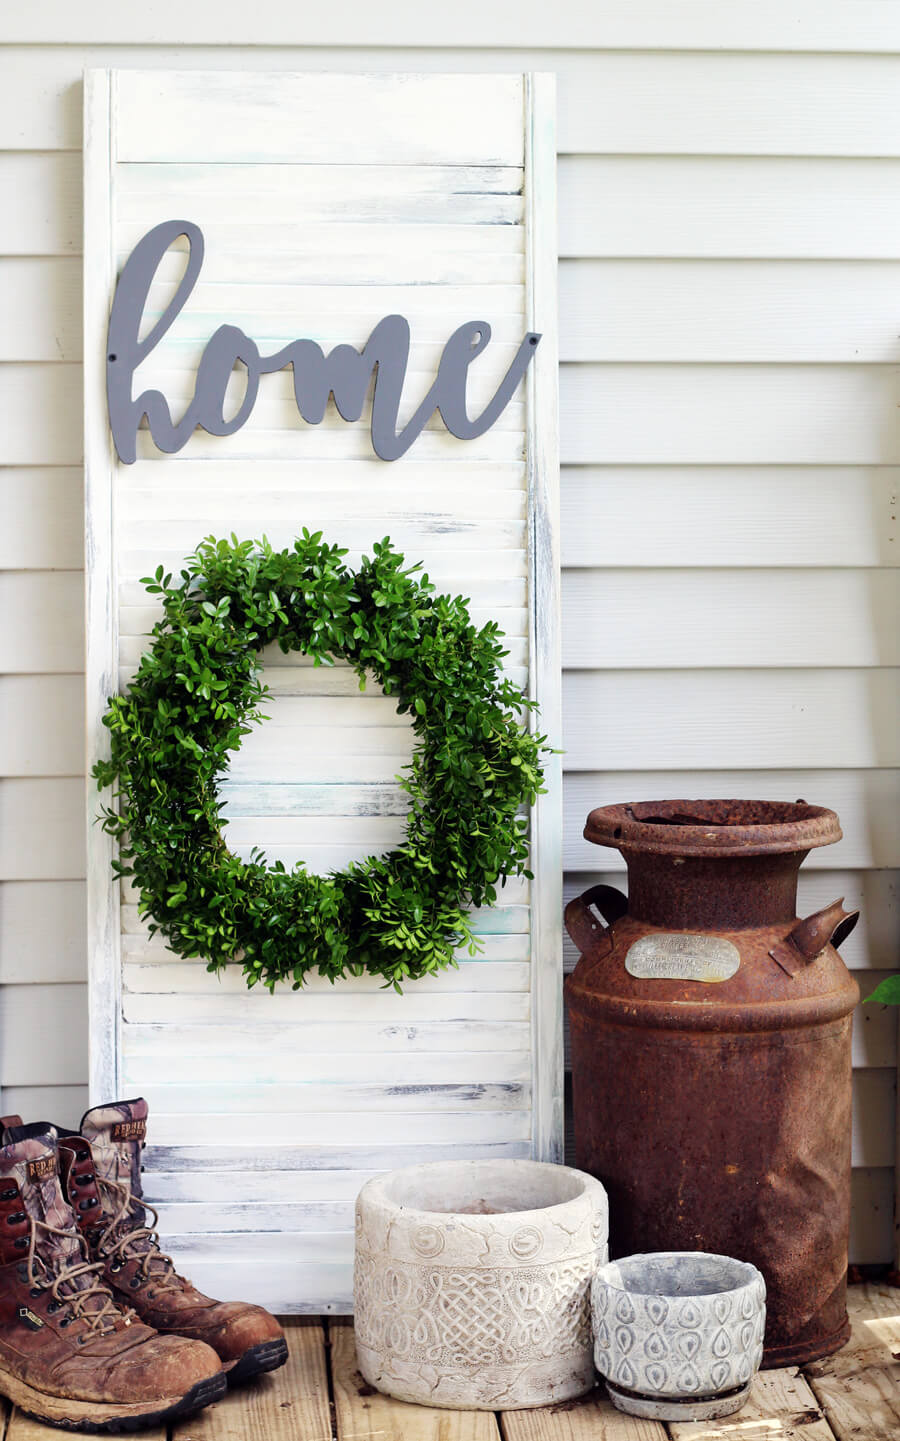 Rustic Wall Decor Shutter DIY | Buy This Cook That